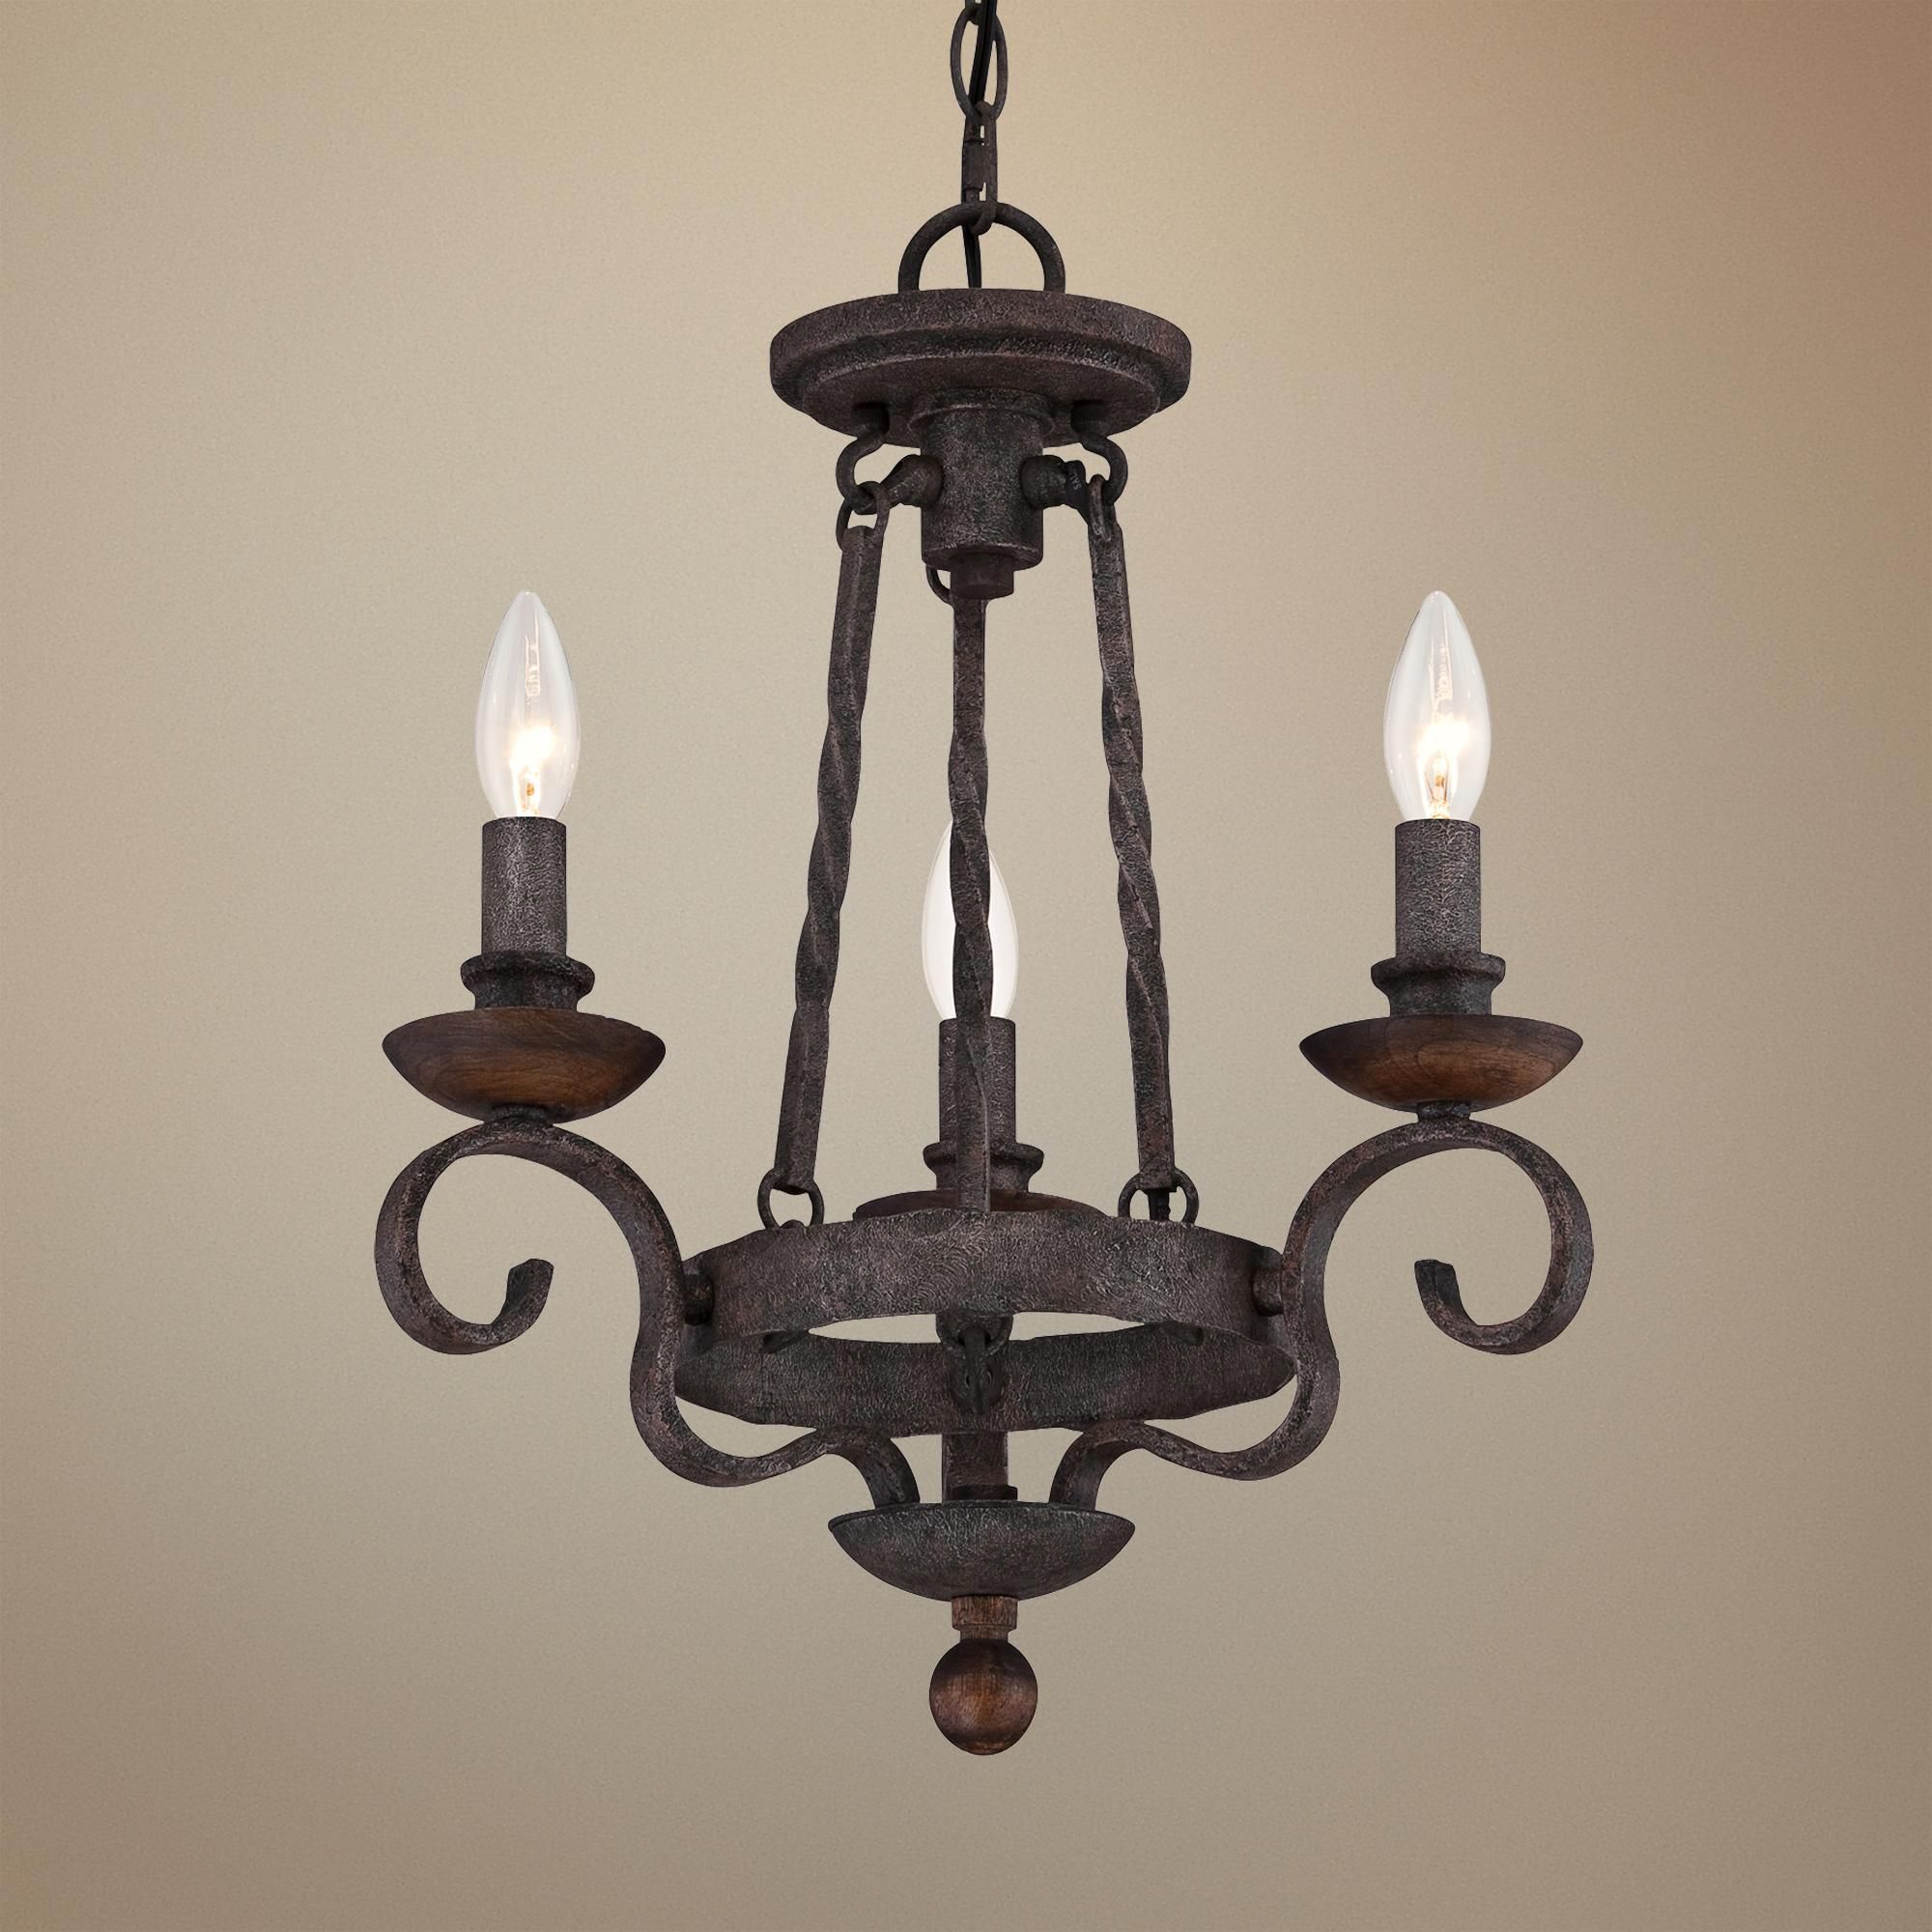 Quoizel Noble 15" Wide Rustic Black Mini Chandelier Intended For Rustic Black Chandeliers (View 2 of 15)